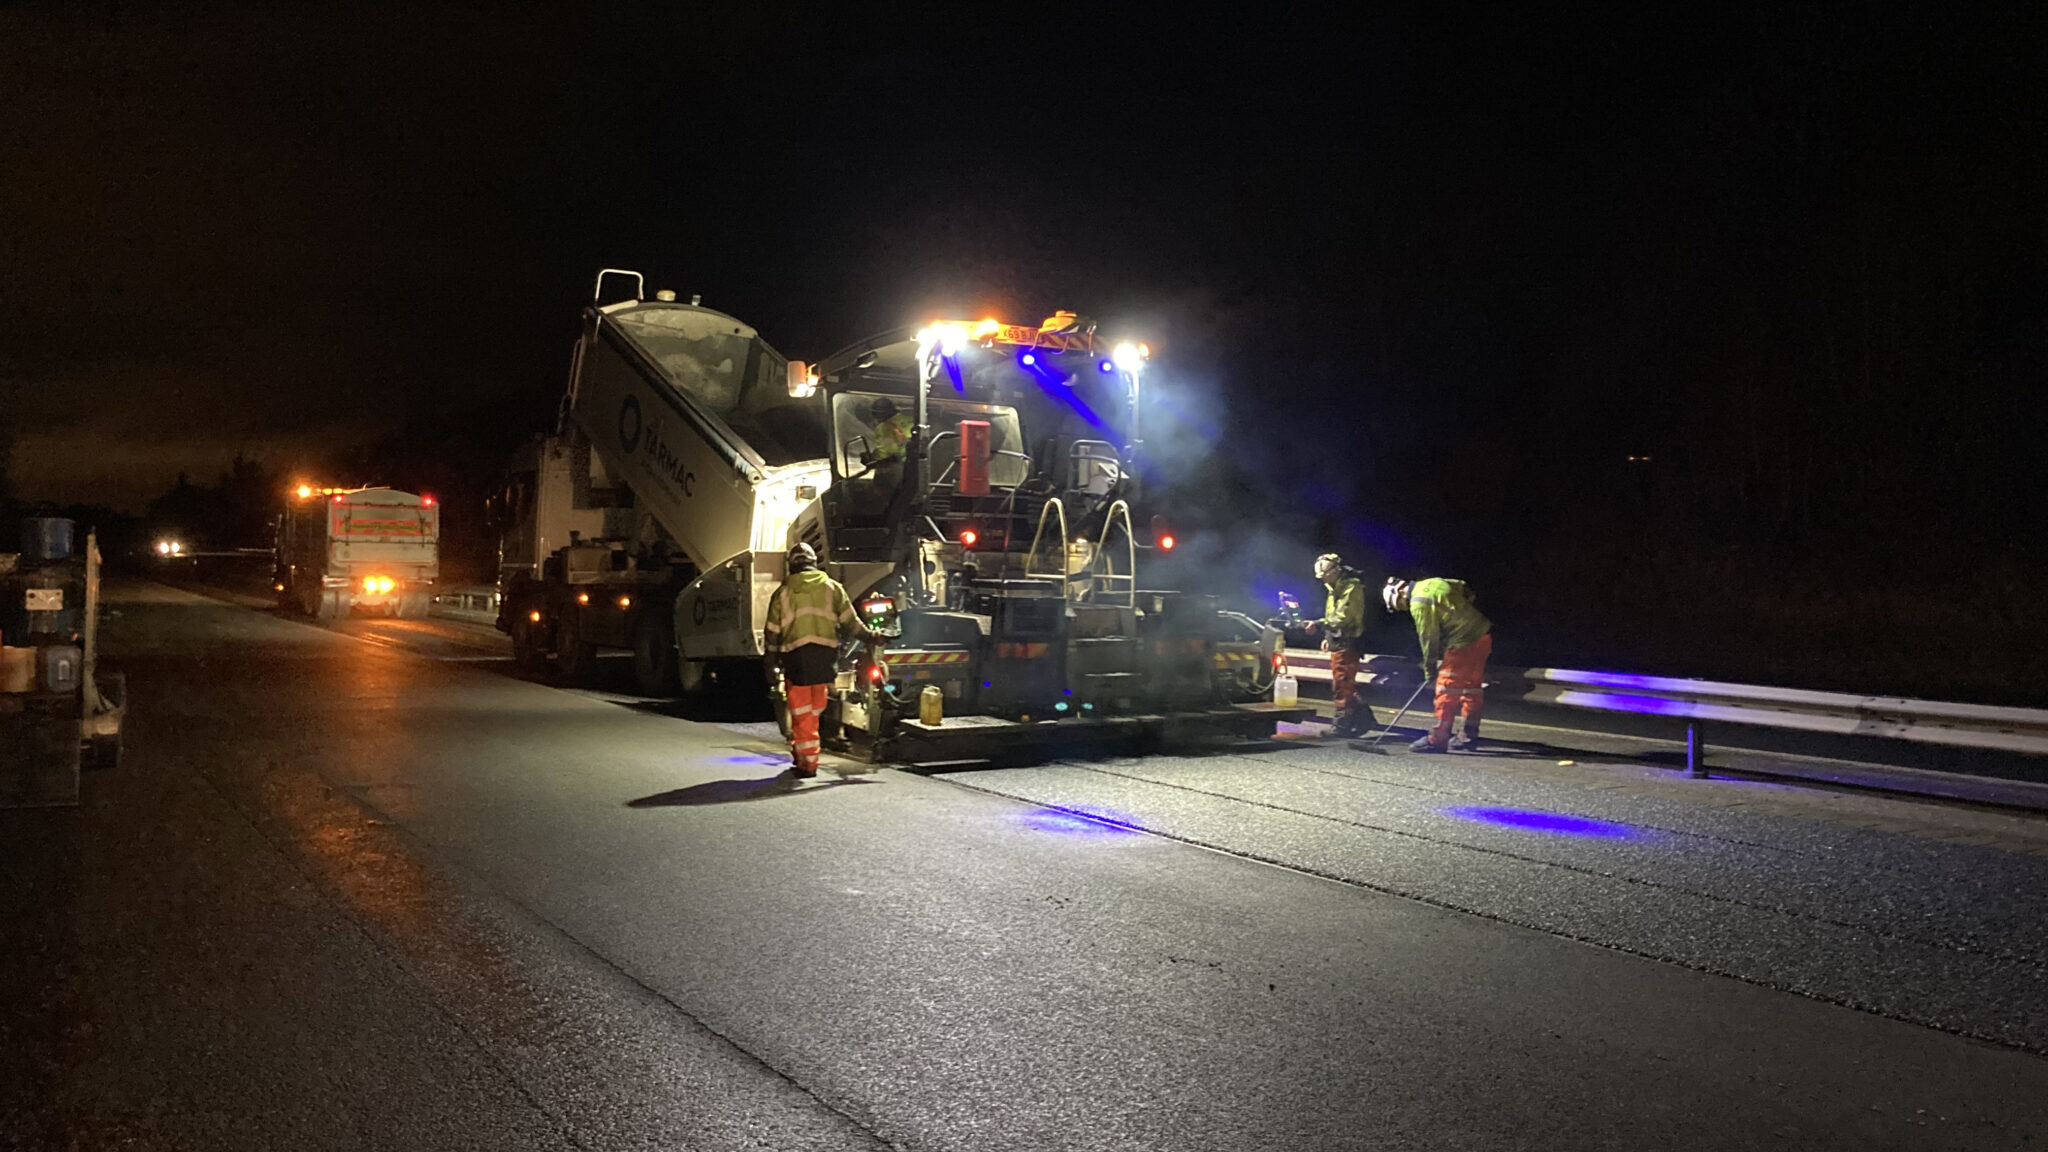 WEEKEND RESURFACING WORKS ON THE M9, NEAR LINLITHGOW